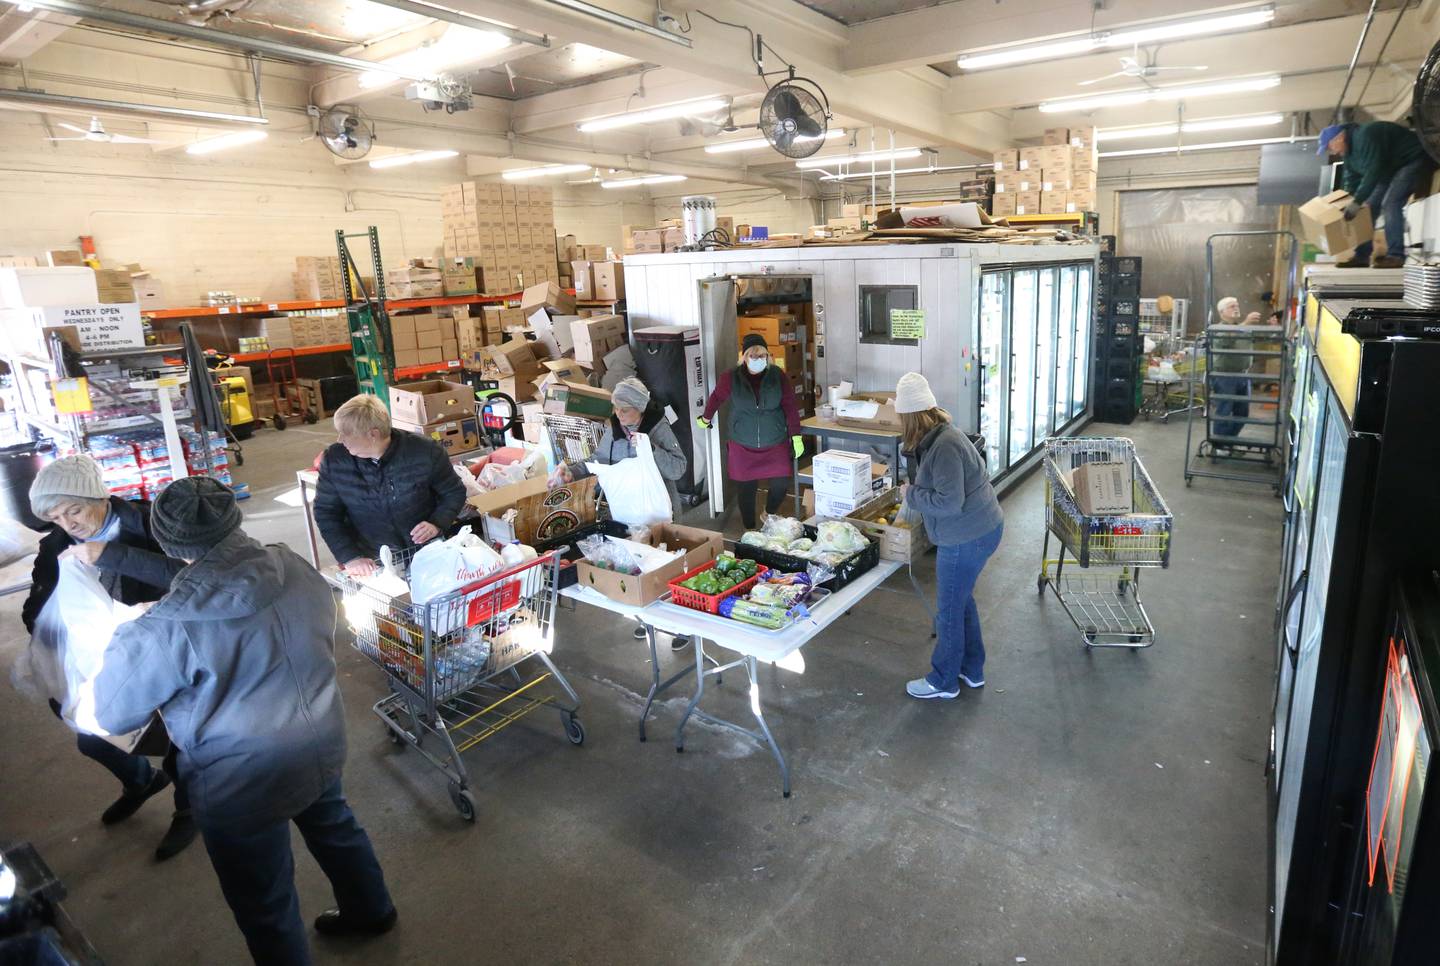 Volunteers gather food for clients at the Hall Township Food Pantry on Wednesday, Nov. 30, 2022 in Spring Valley.